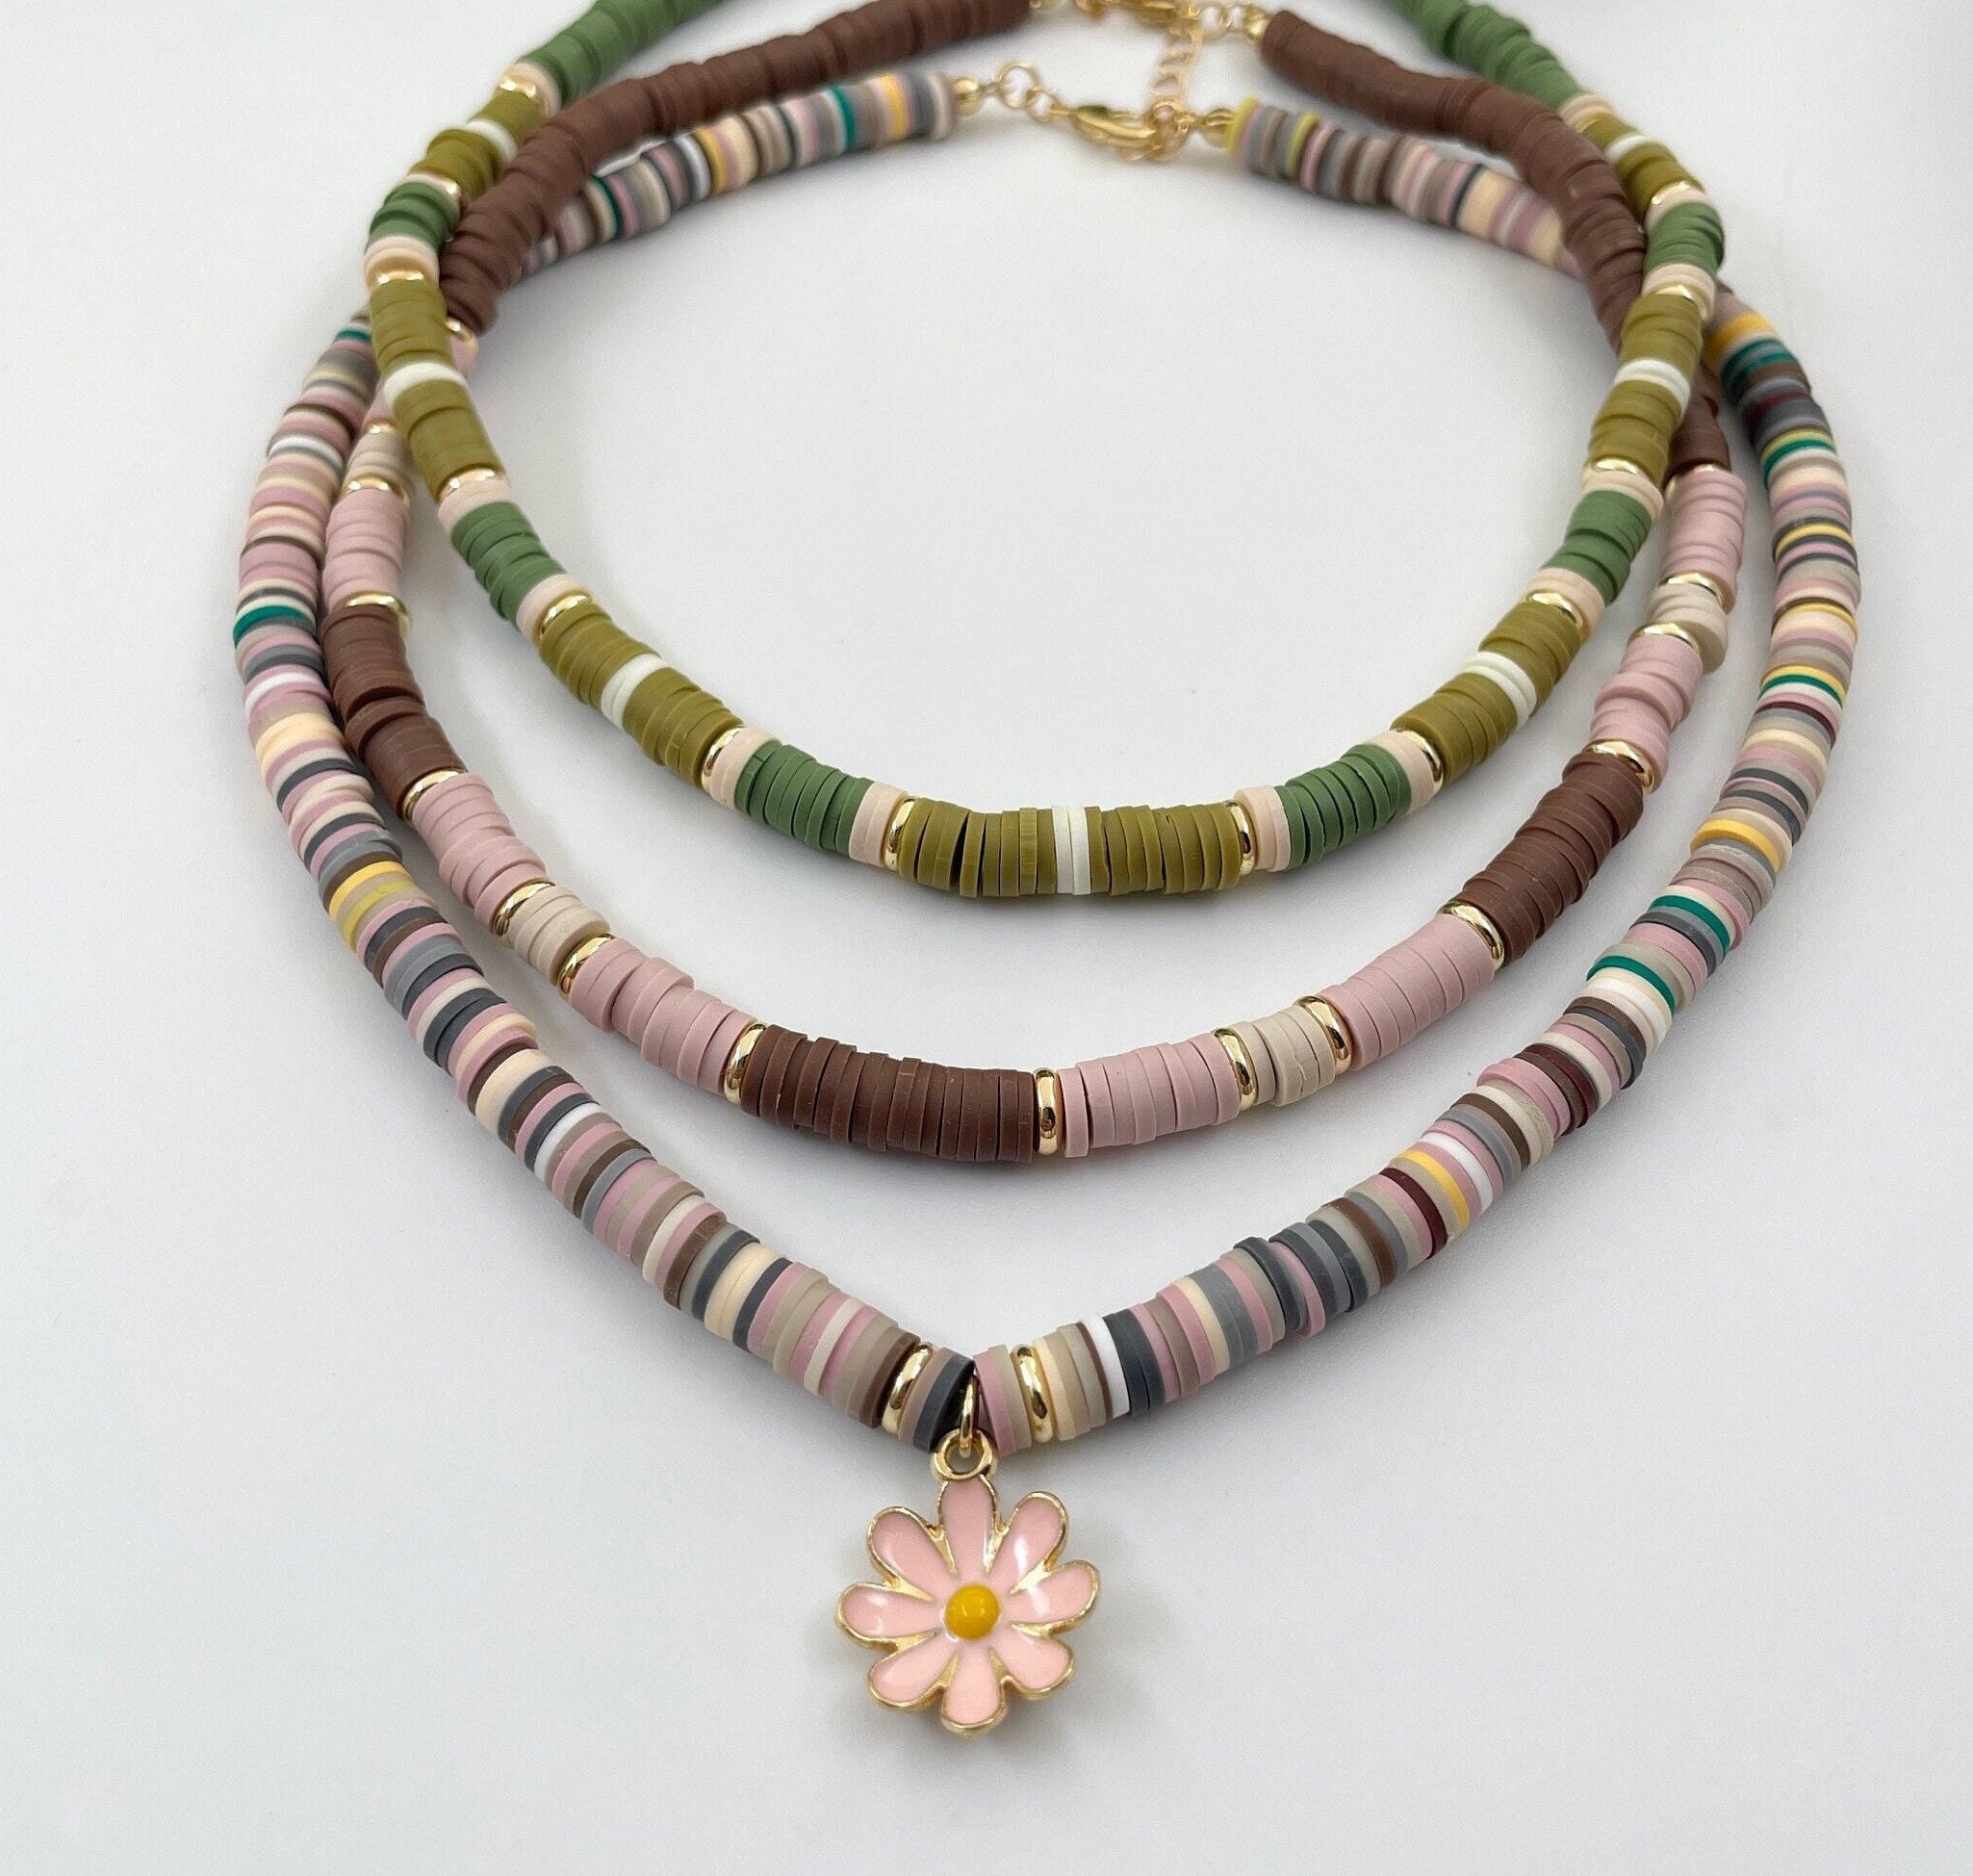 Disc/flat Round Polymer Clay Beads Necklace, Gemstone Agate, Necklace  Heishi Beads, Boho Necklace